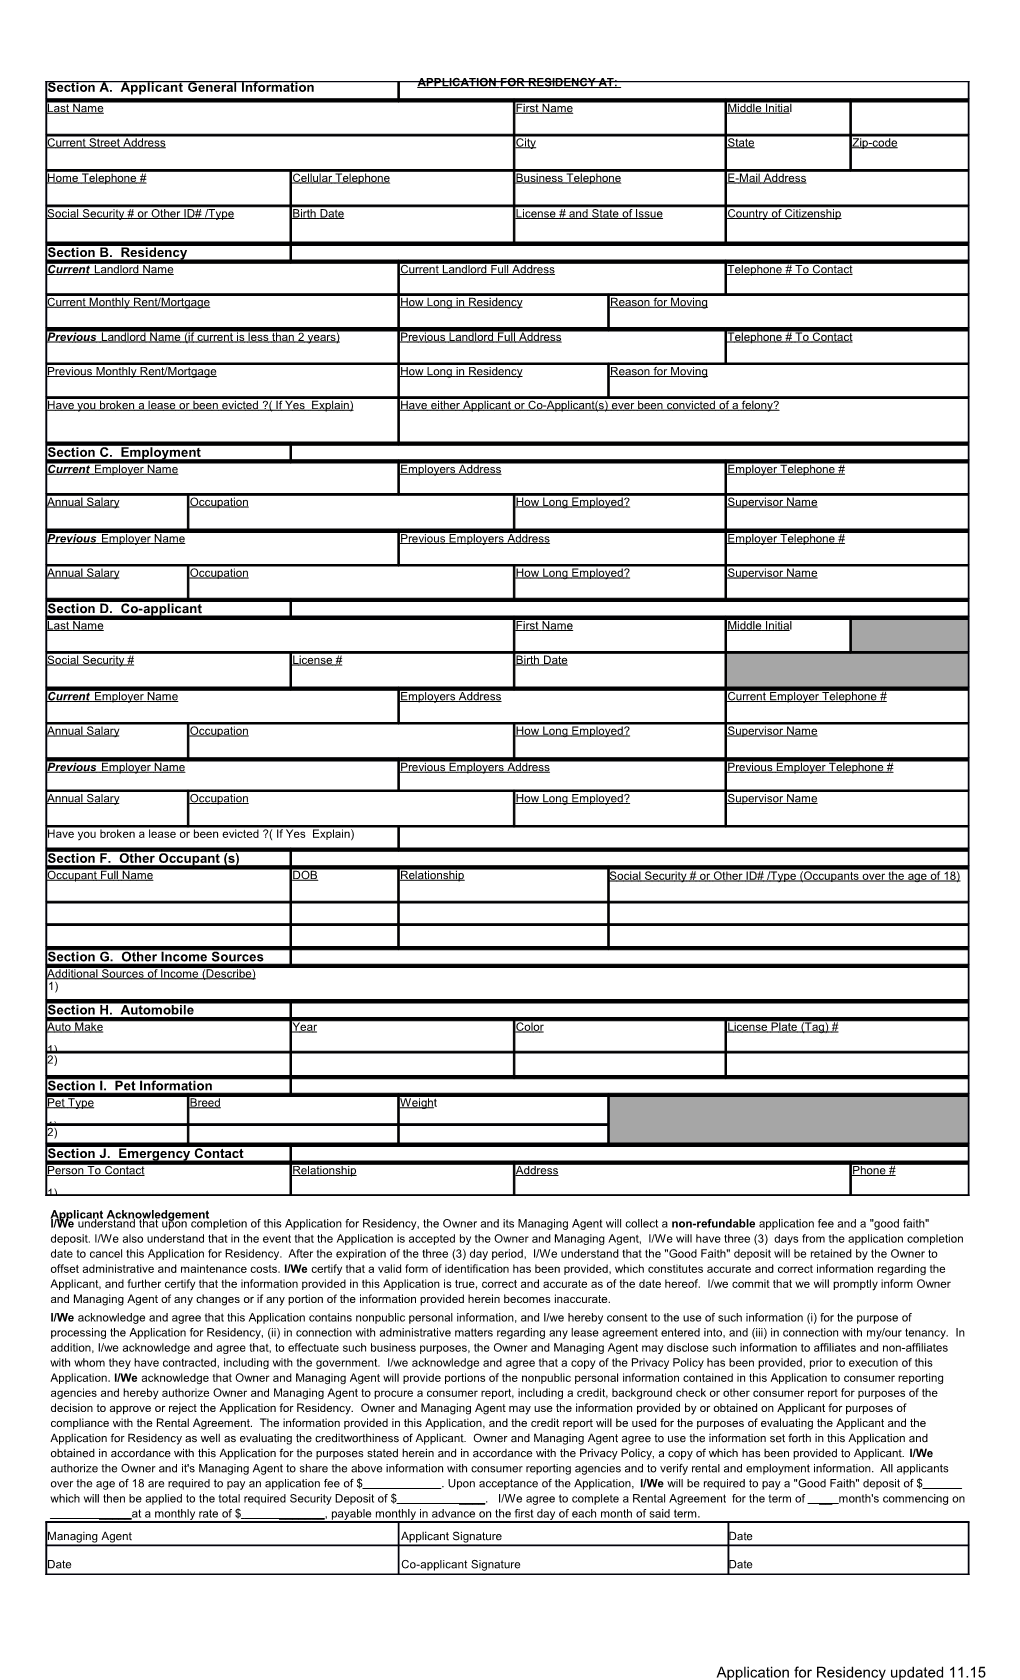 Application for Residency Waterfall